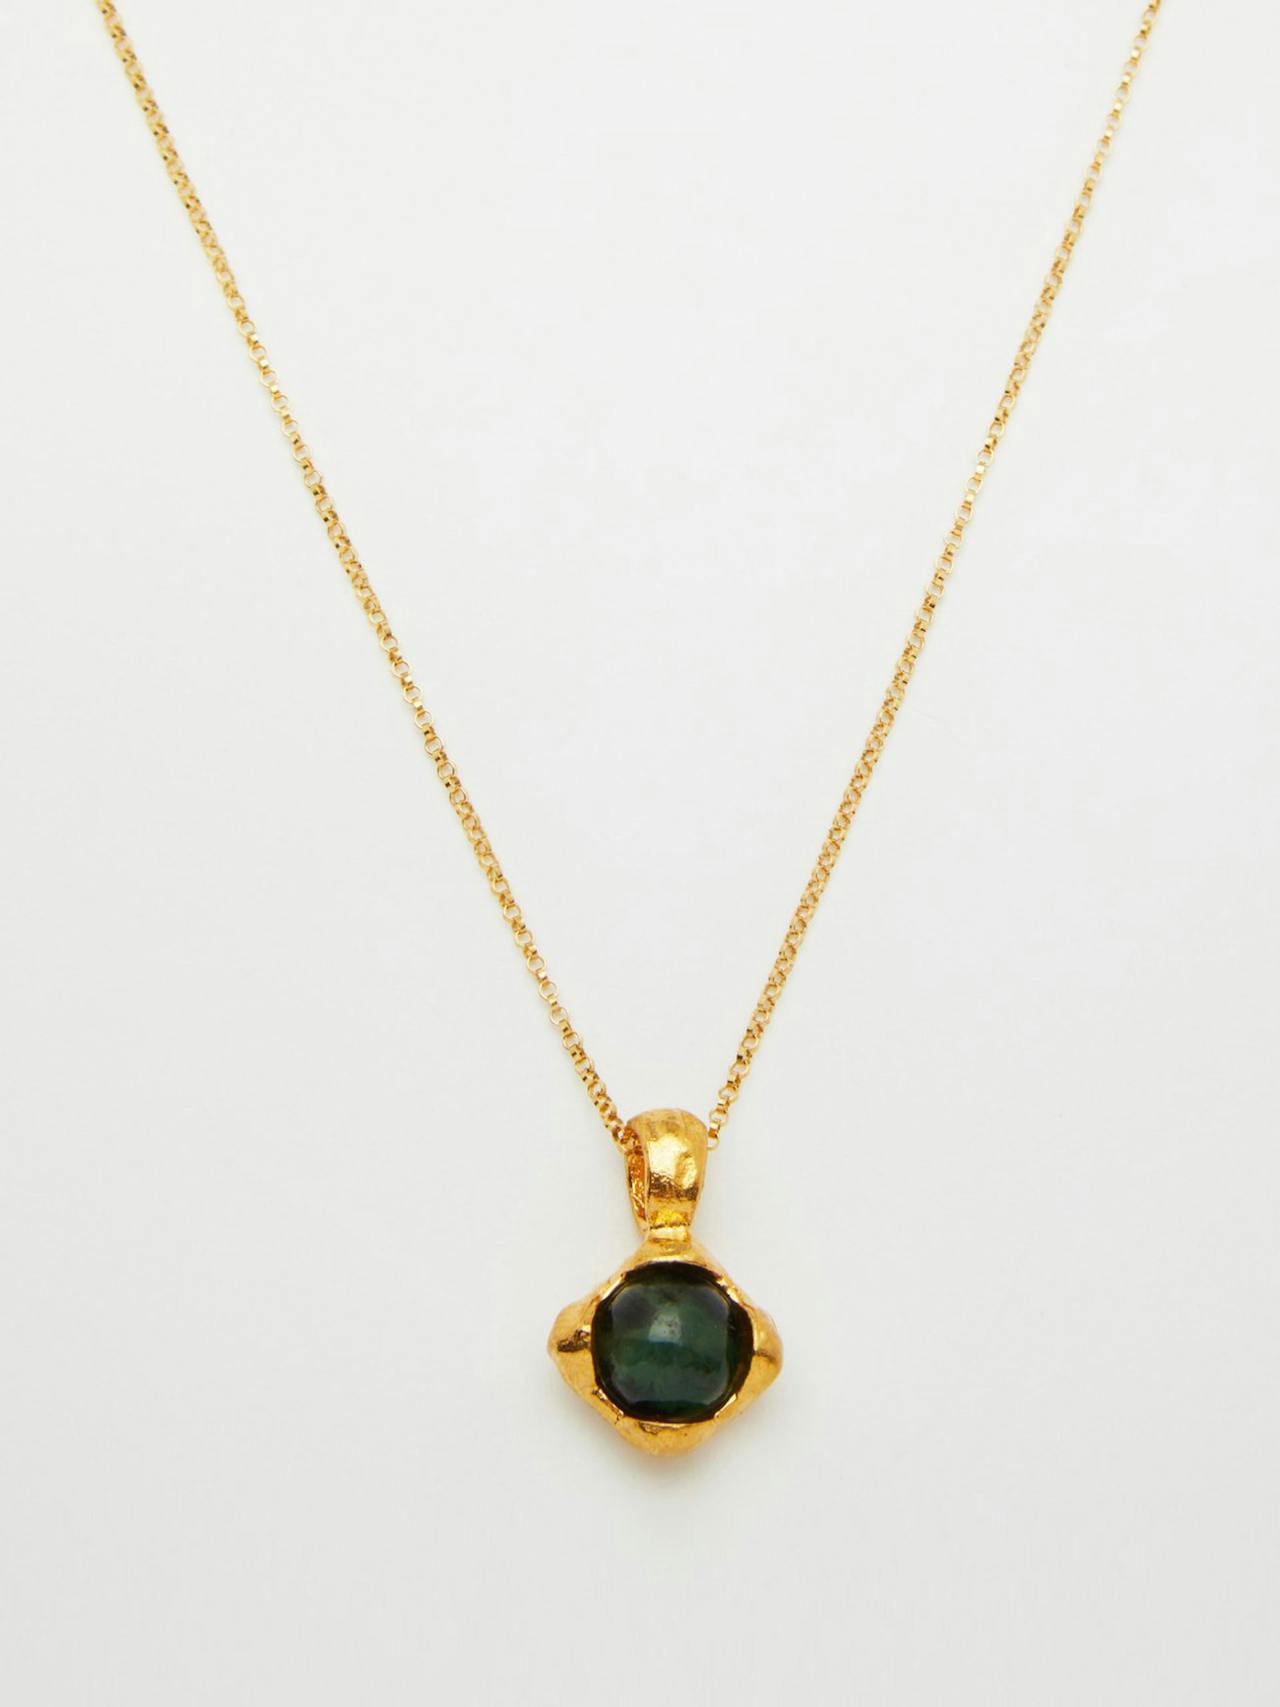 “The Eye Of The Storm” 24kt gold-plated necklace